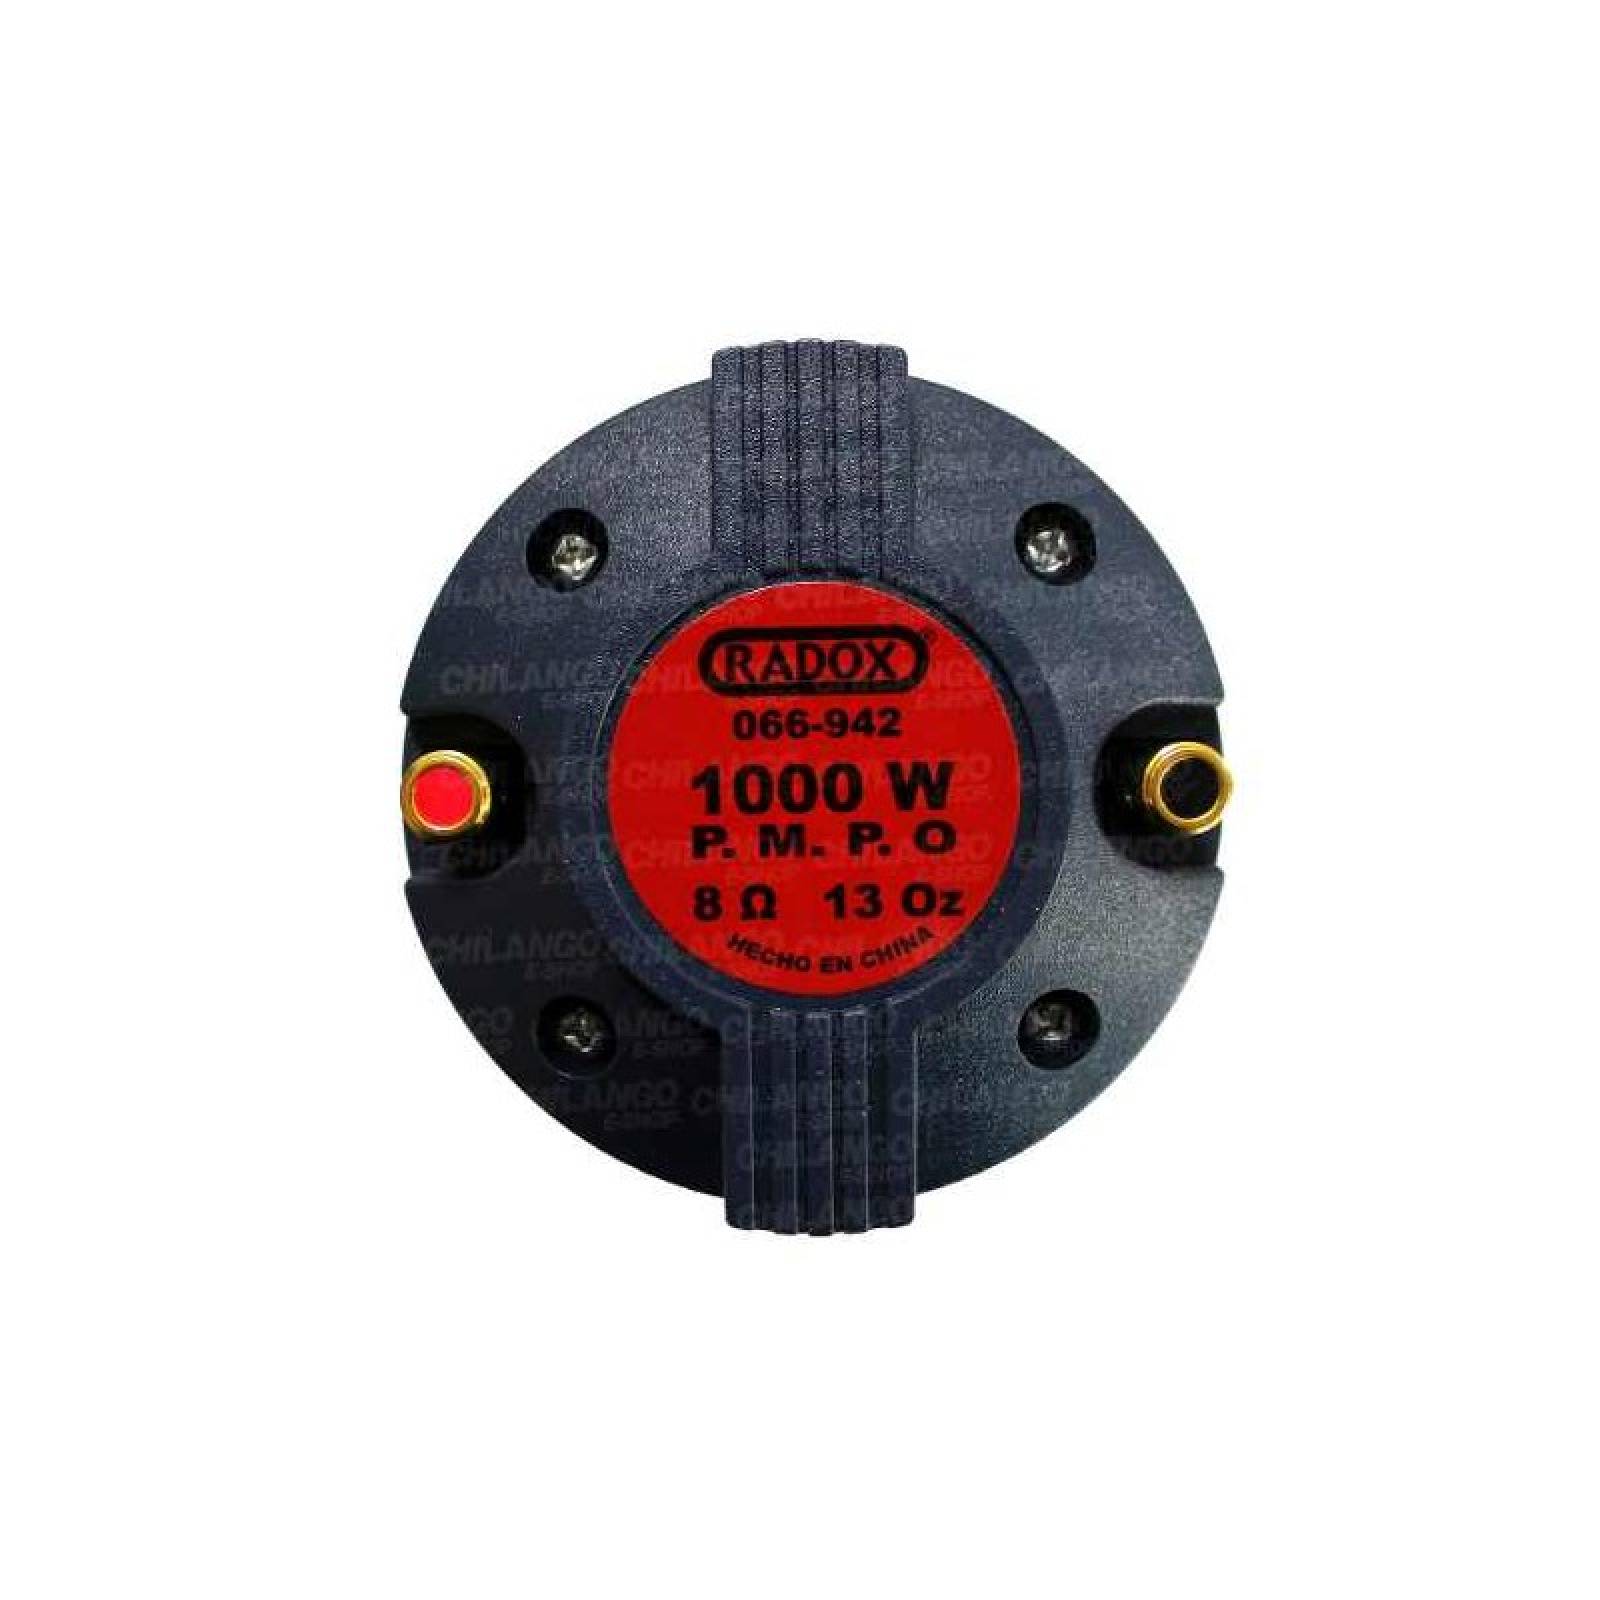 Driver Profesional 8 Ohms 1000w Pmpo 